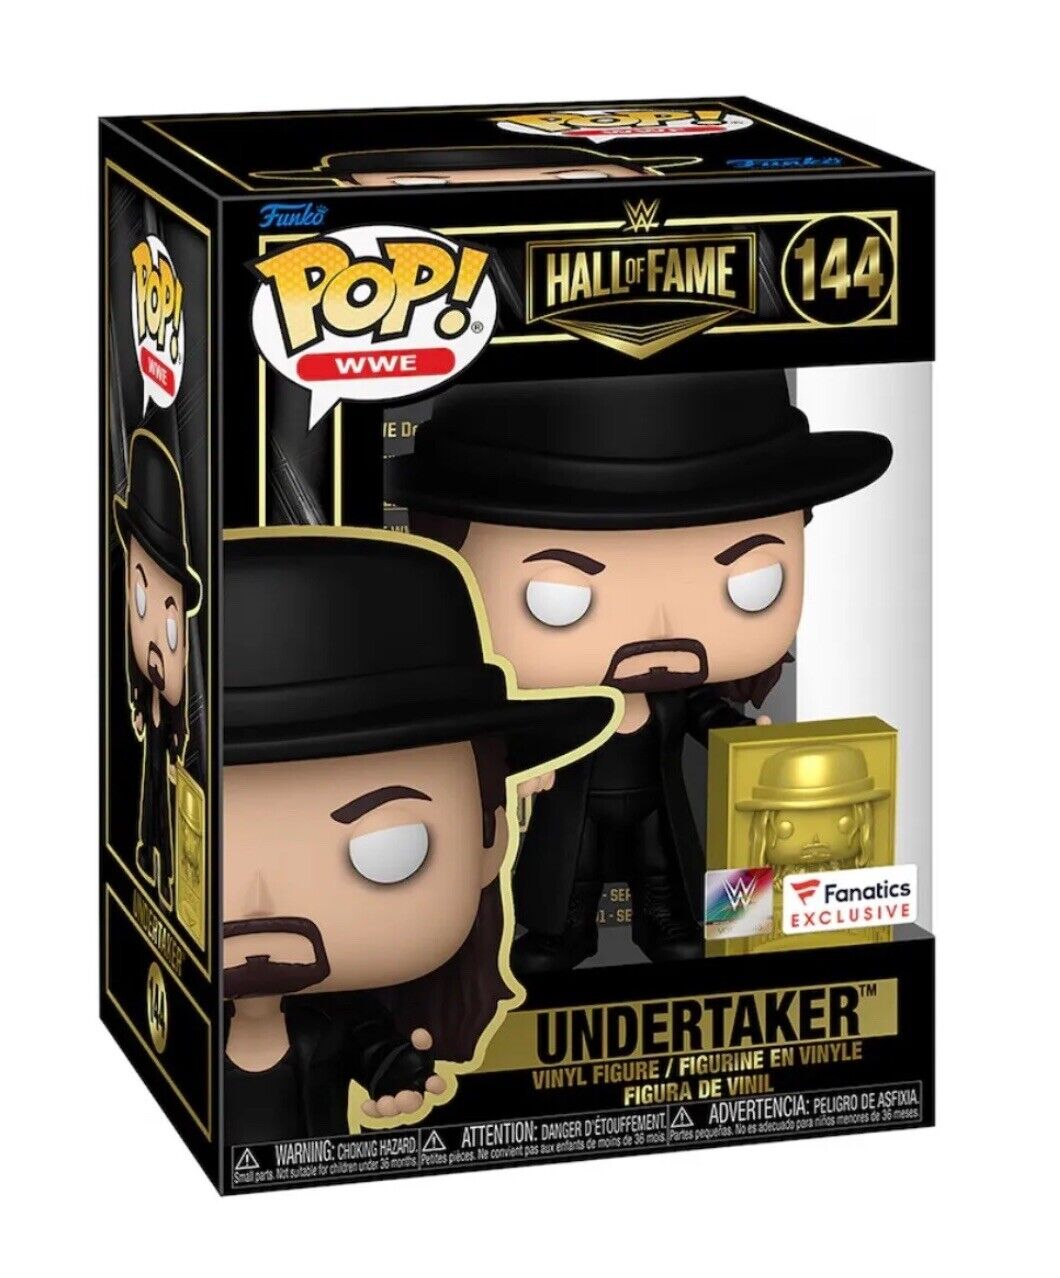 Fanatics Exclusive Funko Pop WWE Undertaker Hall Of Fame LE 5000 In Hand